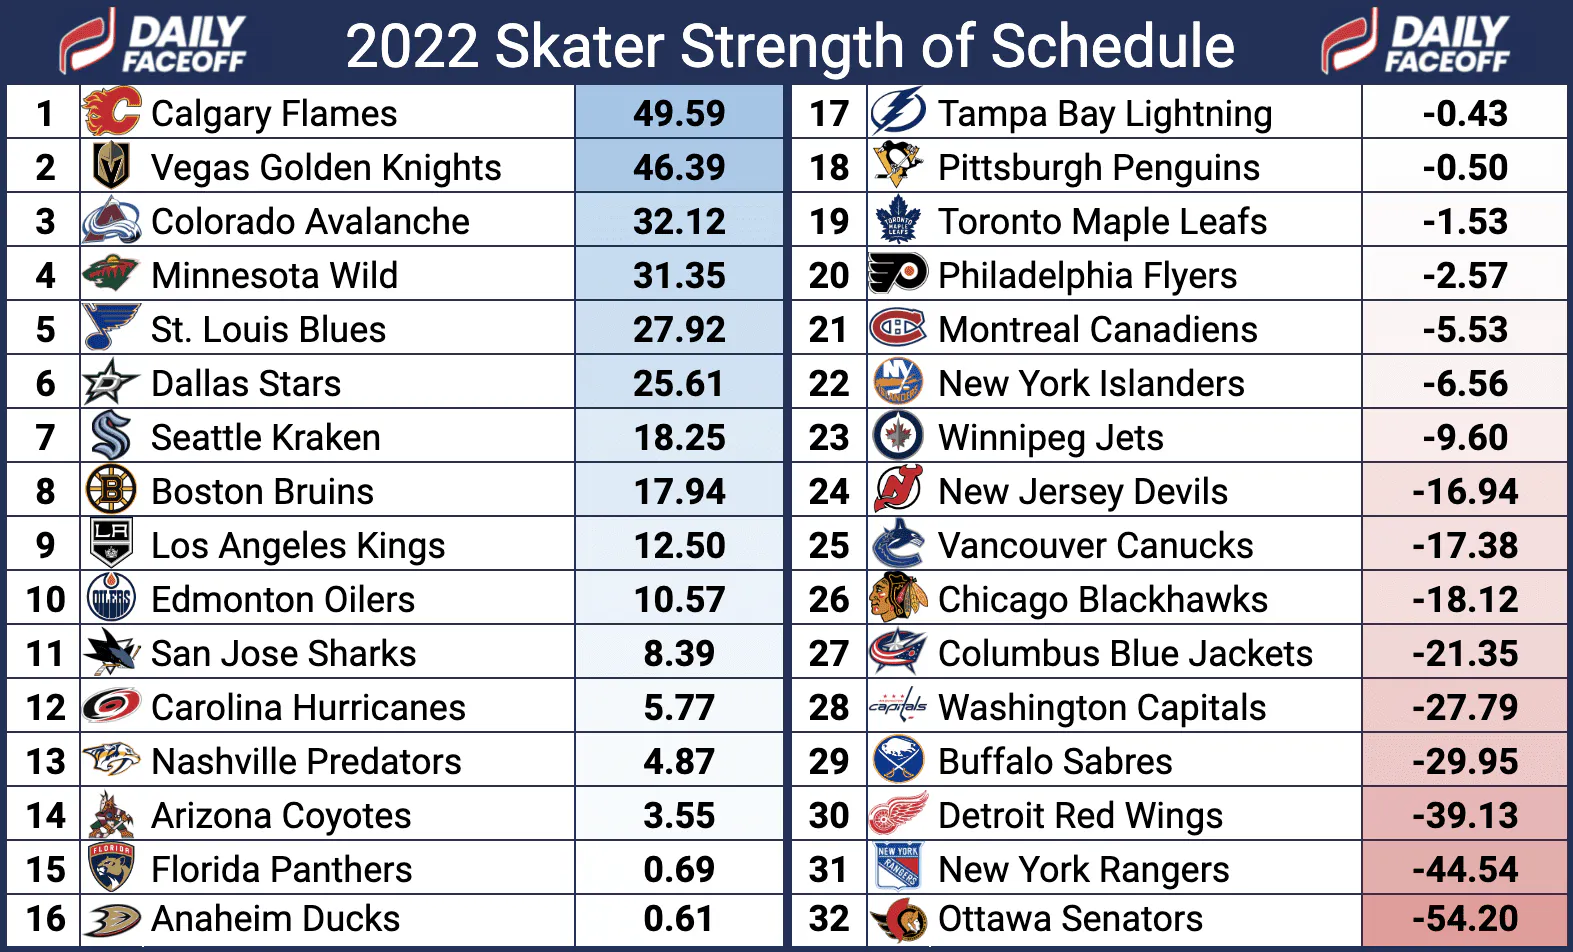 2022 Fantasy Hockey Skaters Strength of Schedule